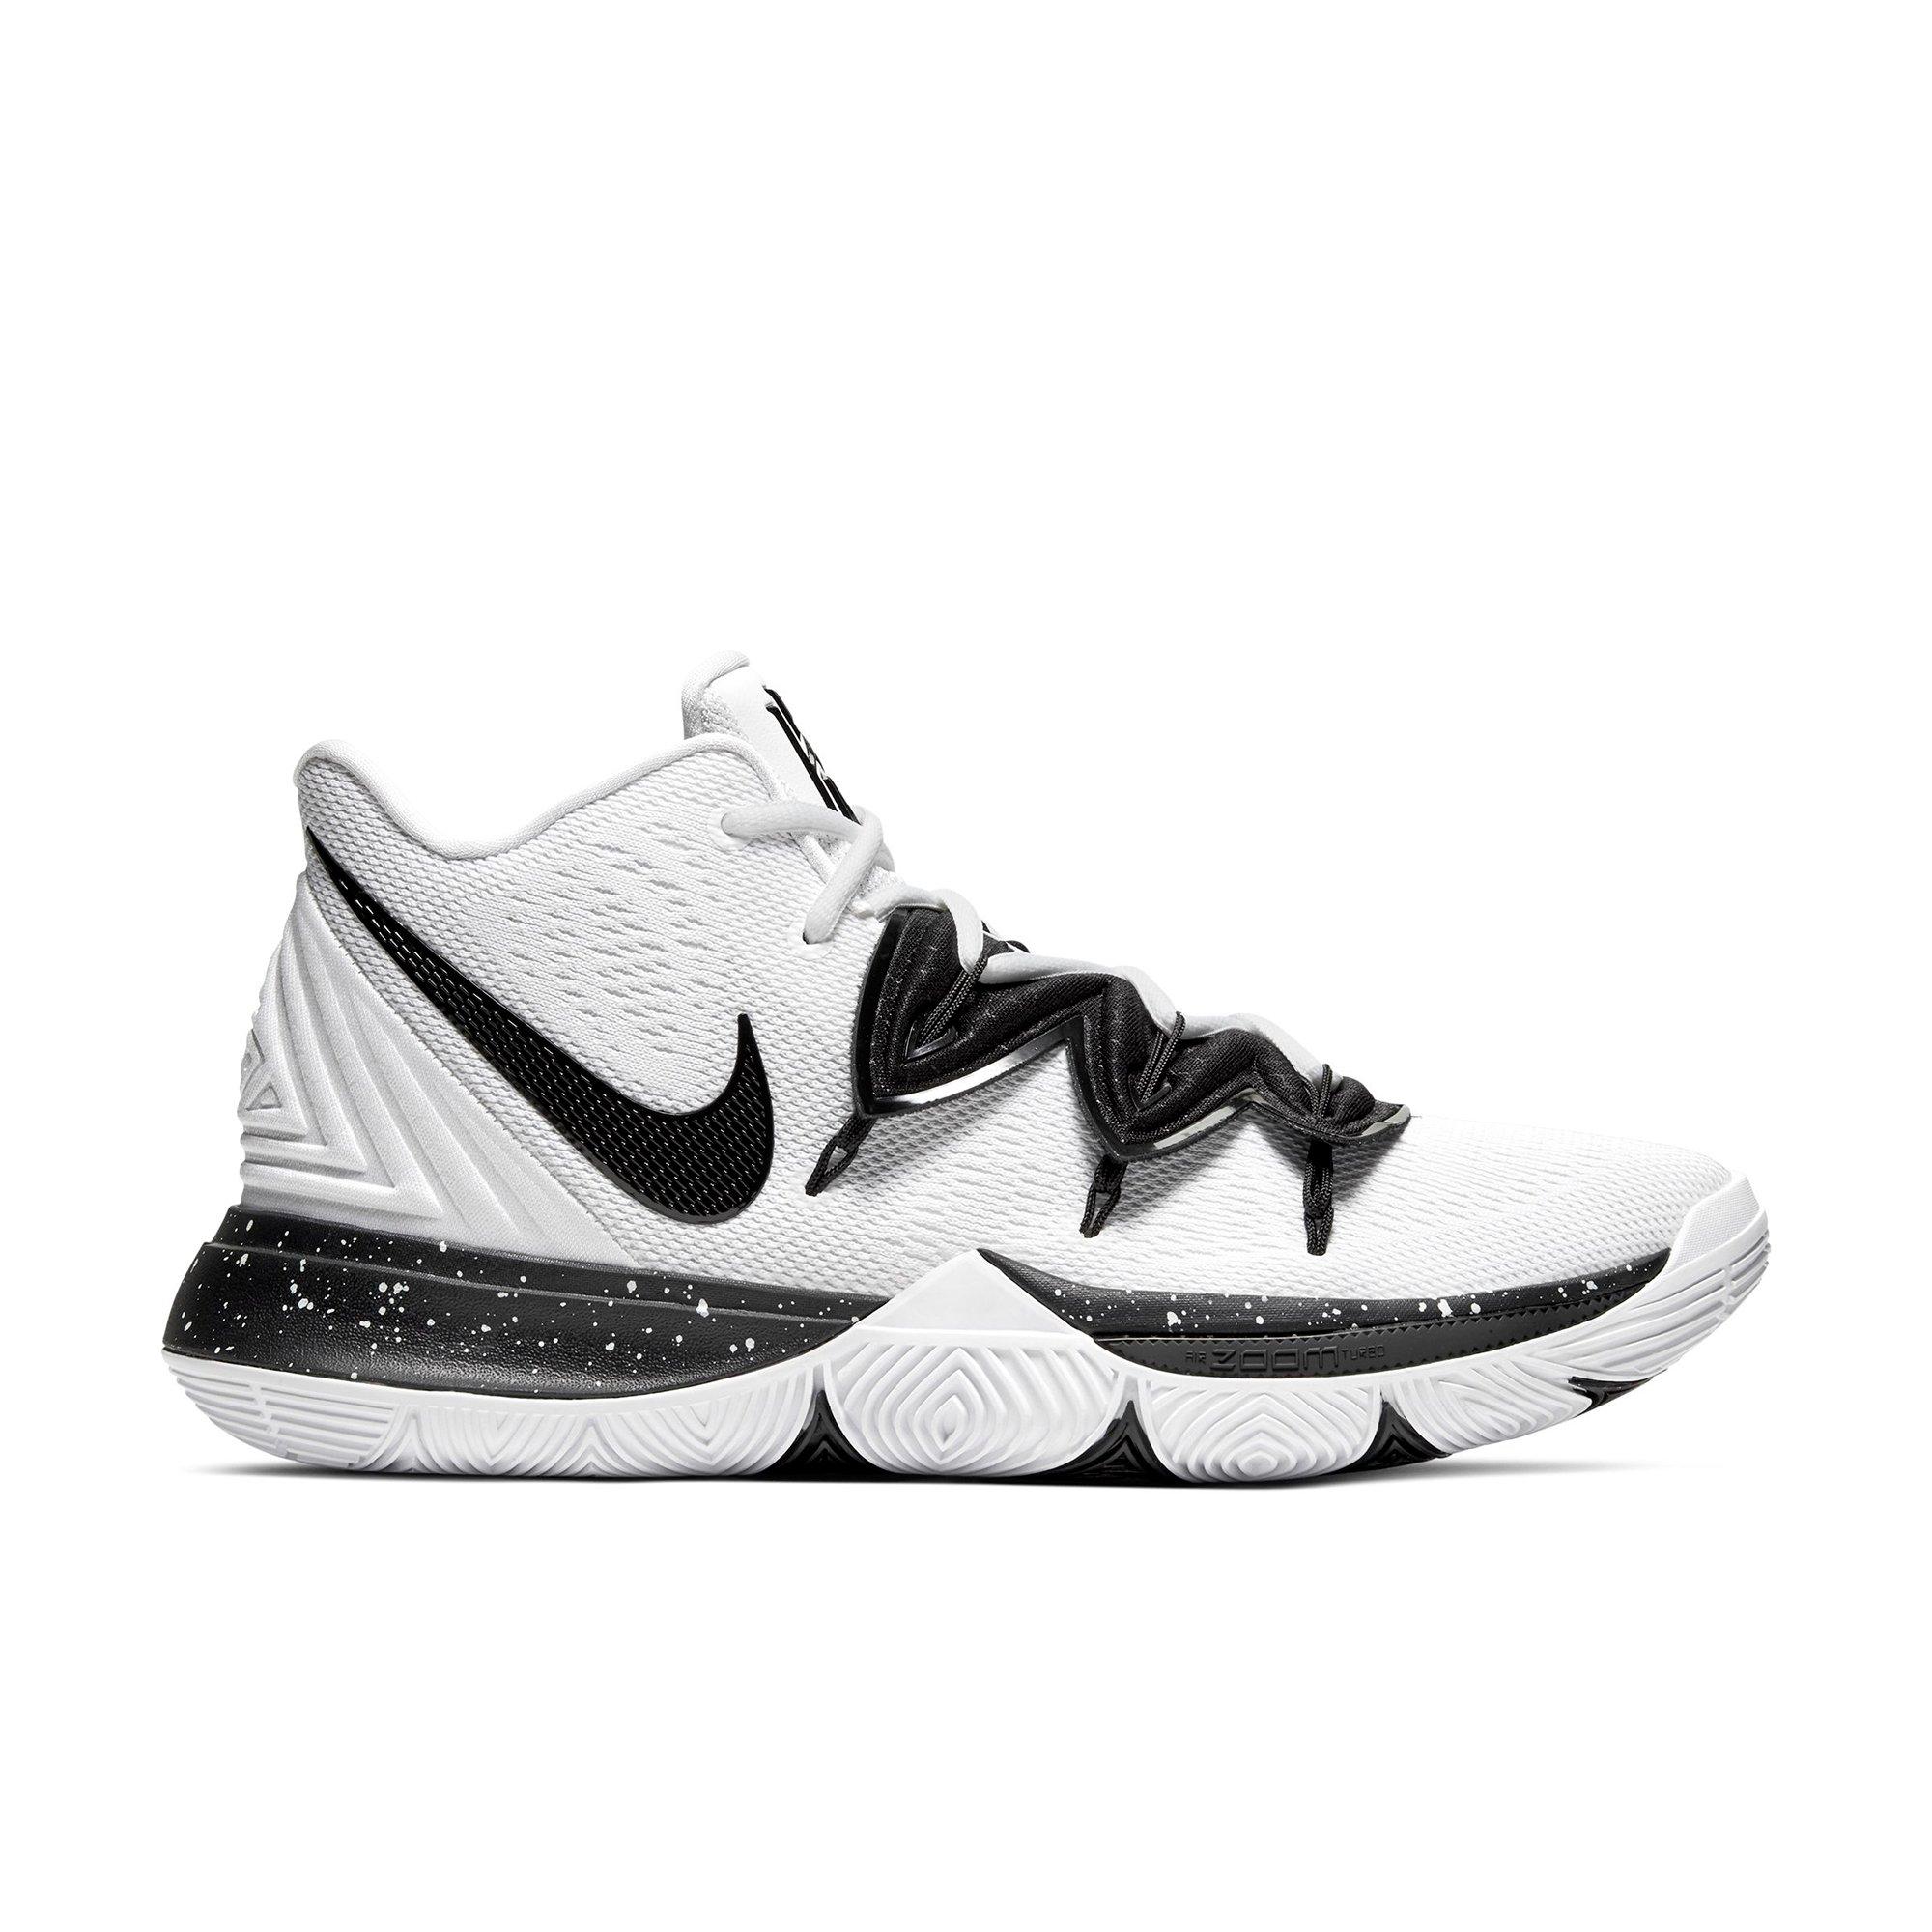 black and white kyrie irving shoes